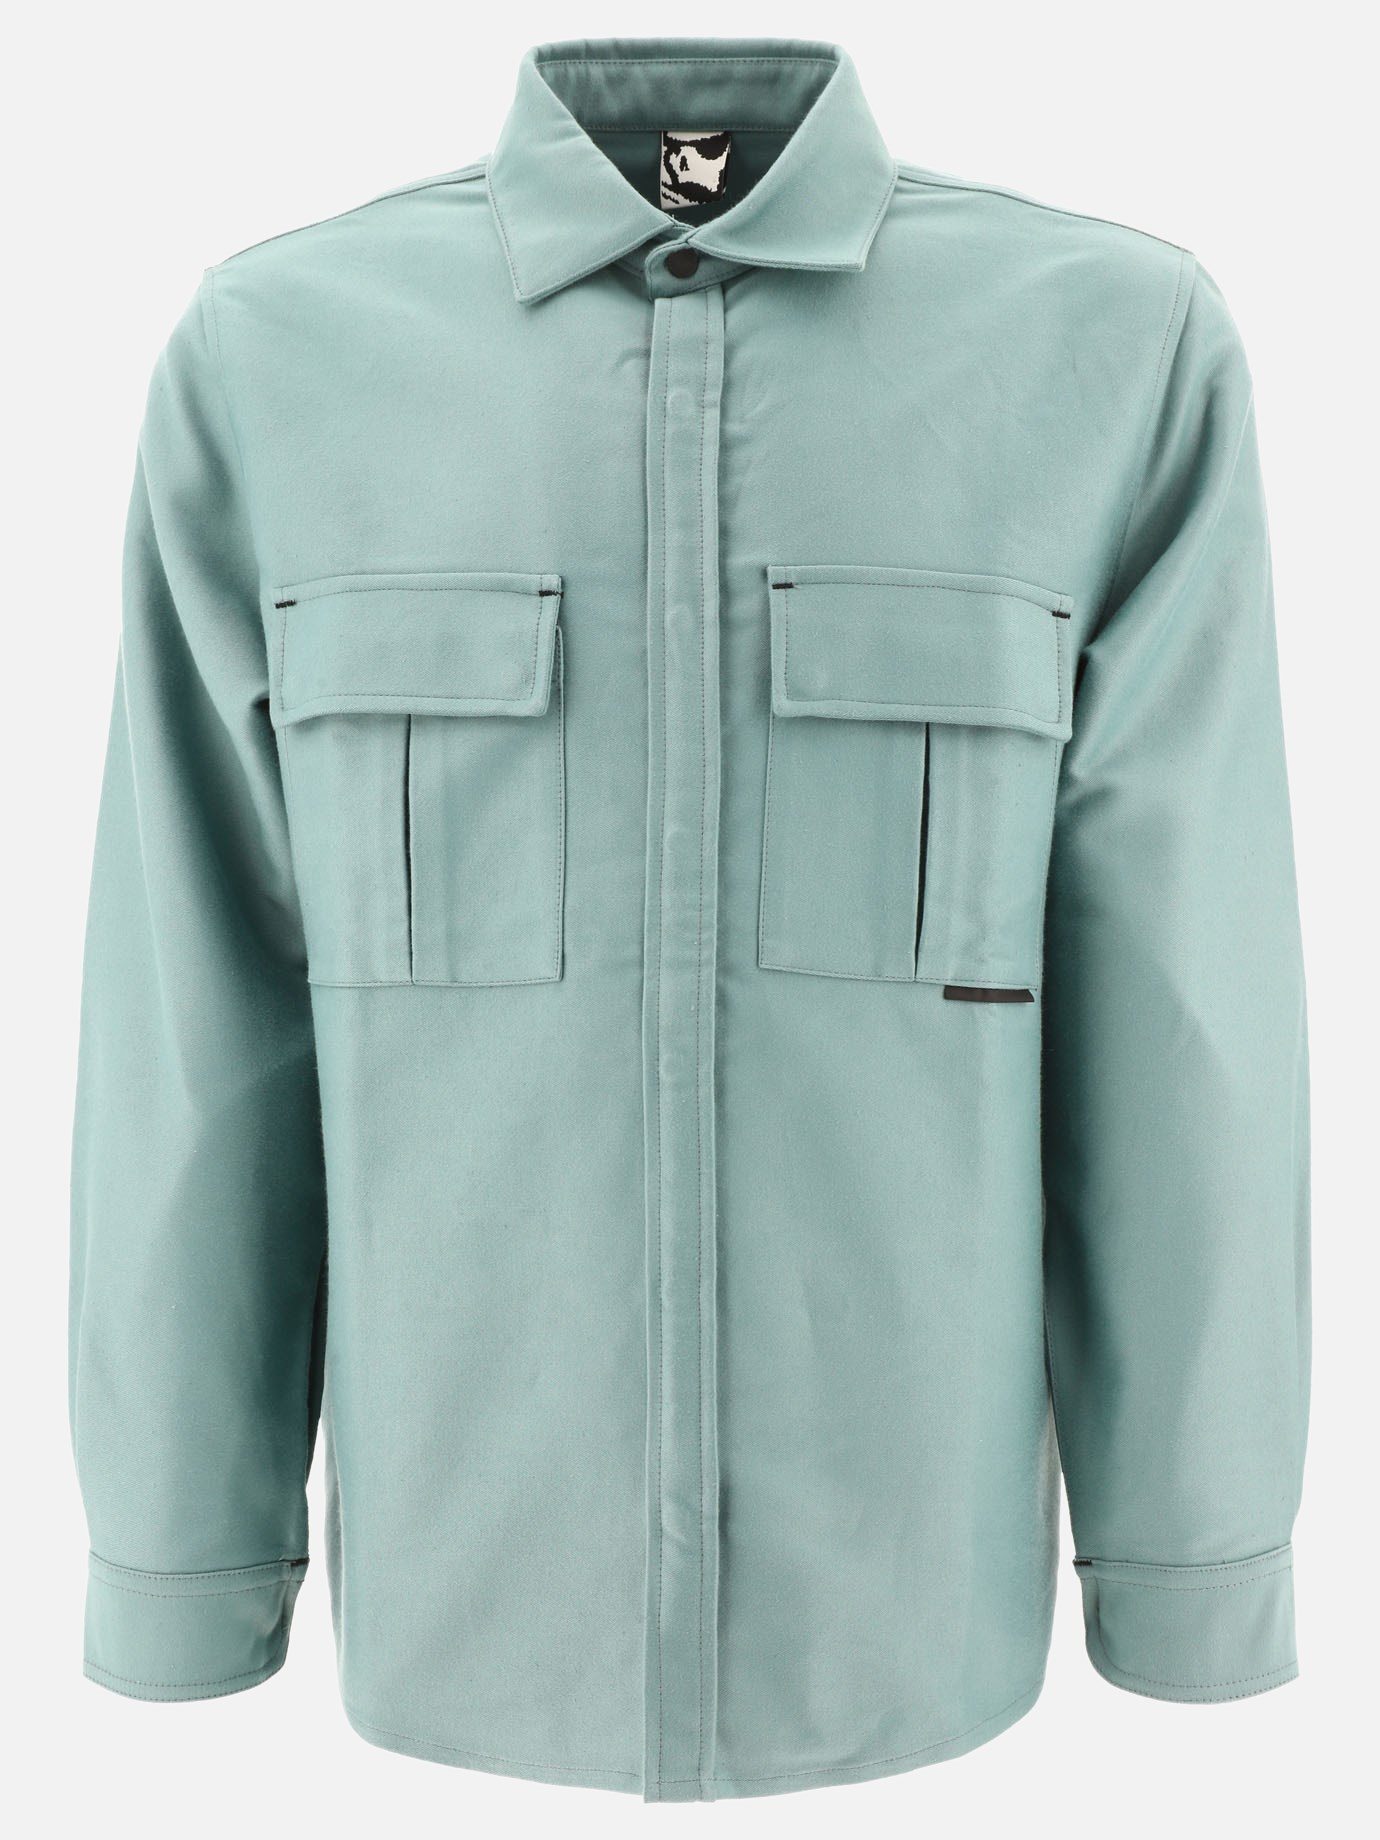 Overshirt  Replicated Bold Fustain by Gr10K - 1